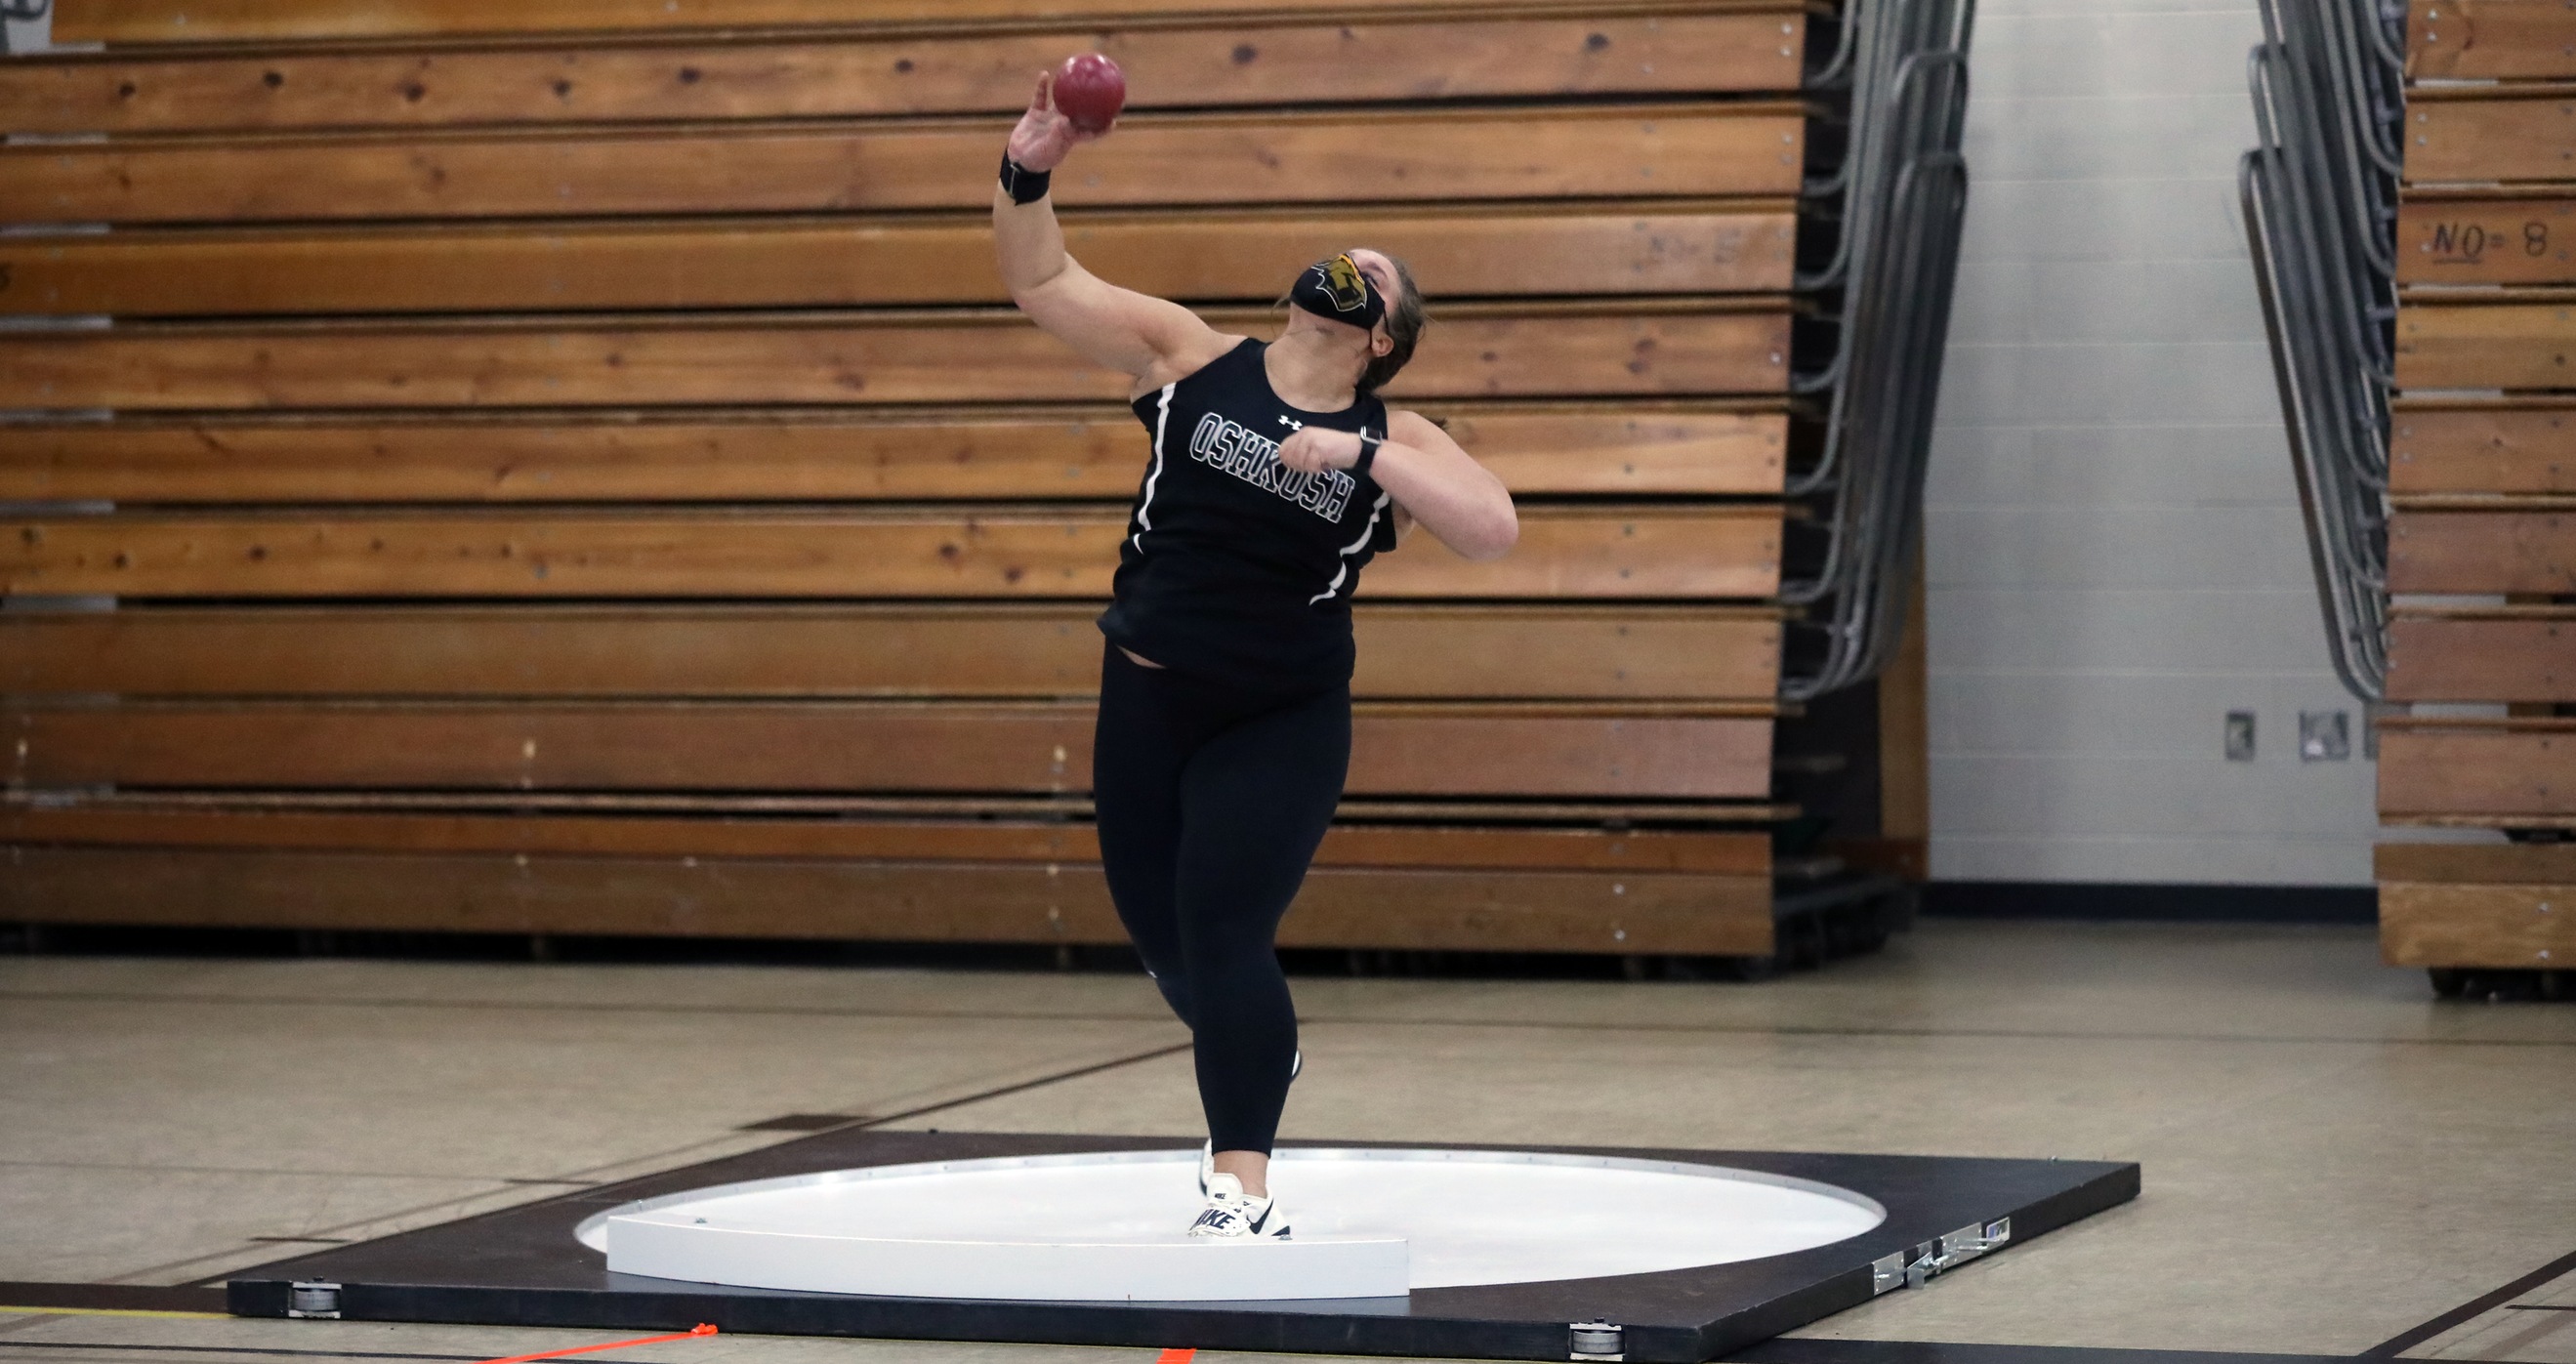 Brenna Masloroff finished fourth in the shot put for the Titans.